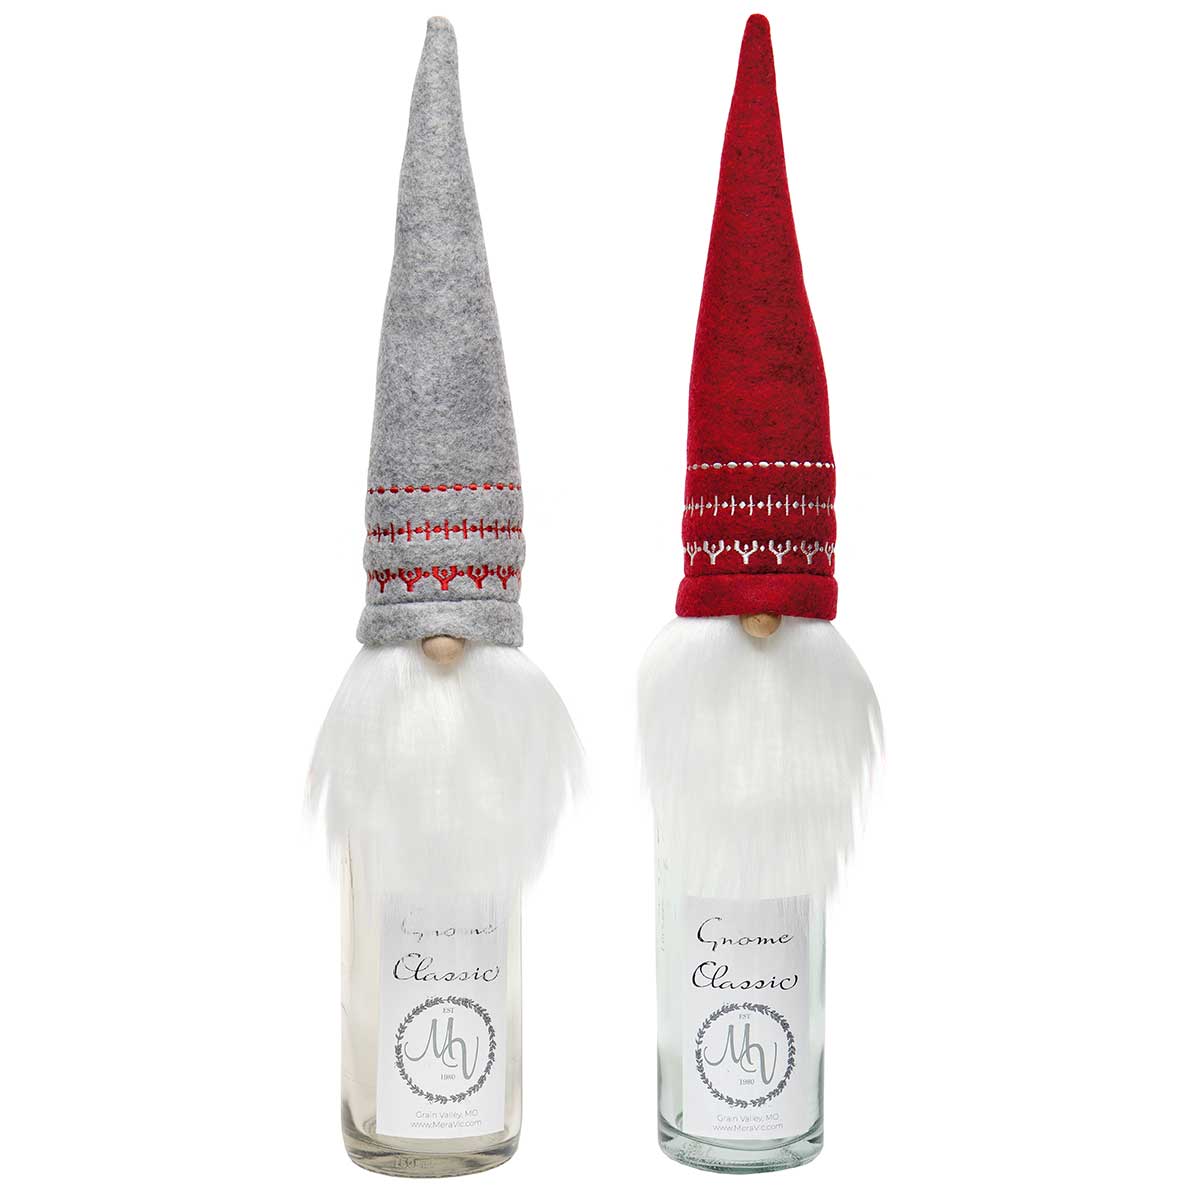 EMBROIDERED HAT GNOME BOTTLE TOPPER BURGUNDY/GREY WITH